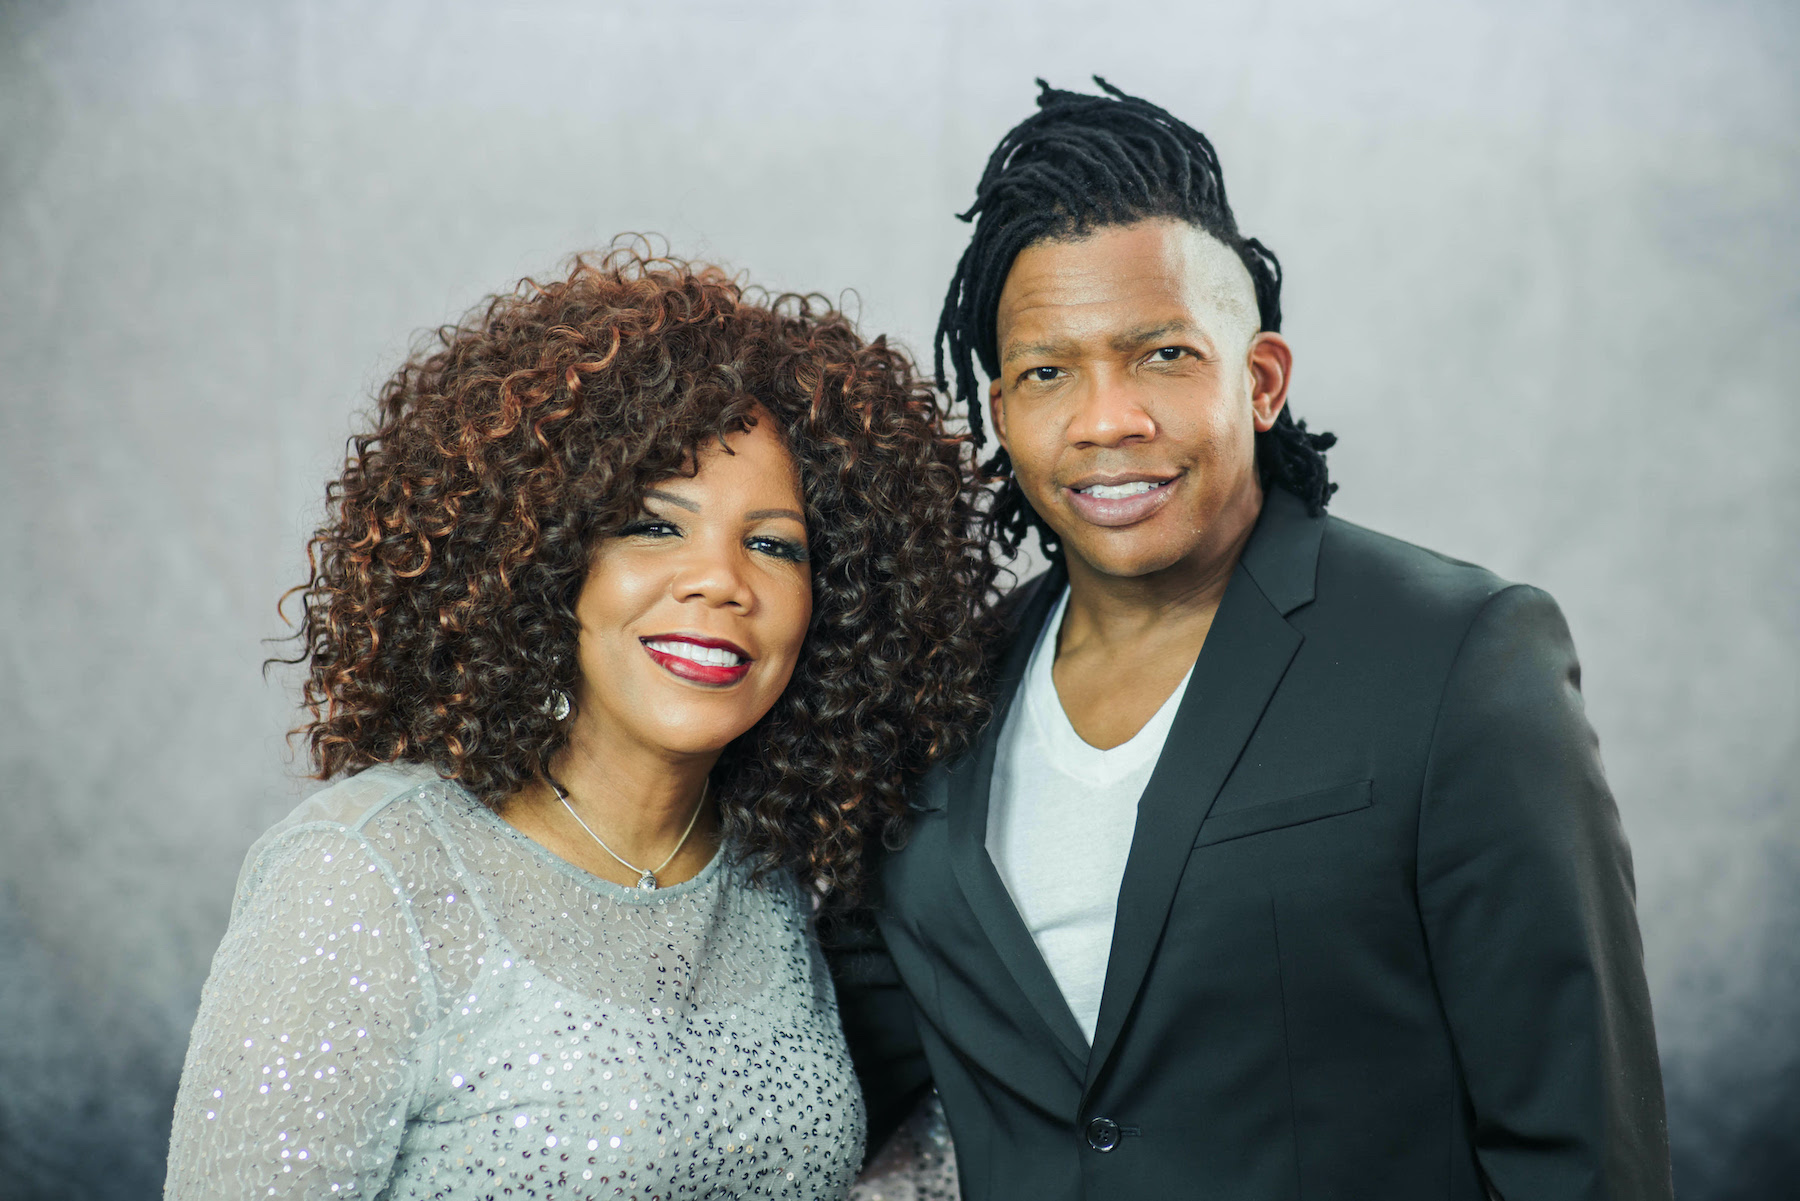 Lynda Randle and Michael Tait (Image courtesy of Turning Point Media Relations)